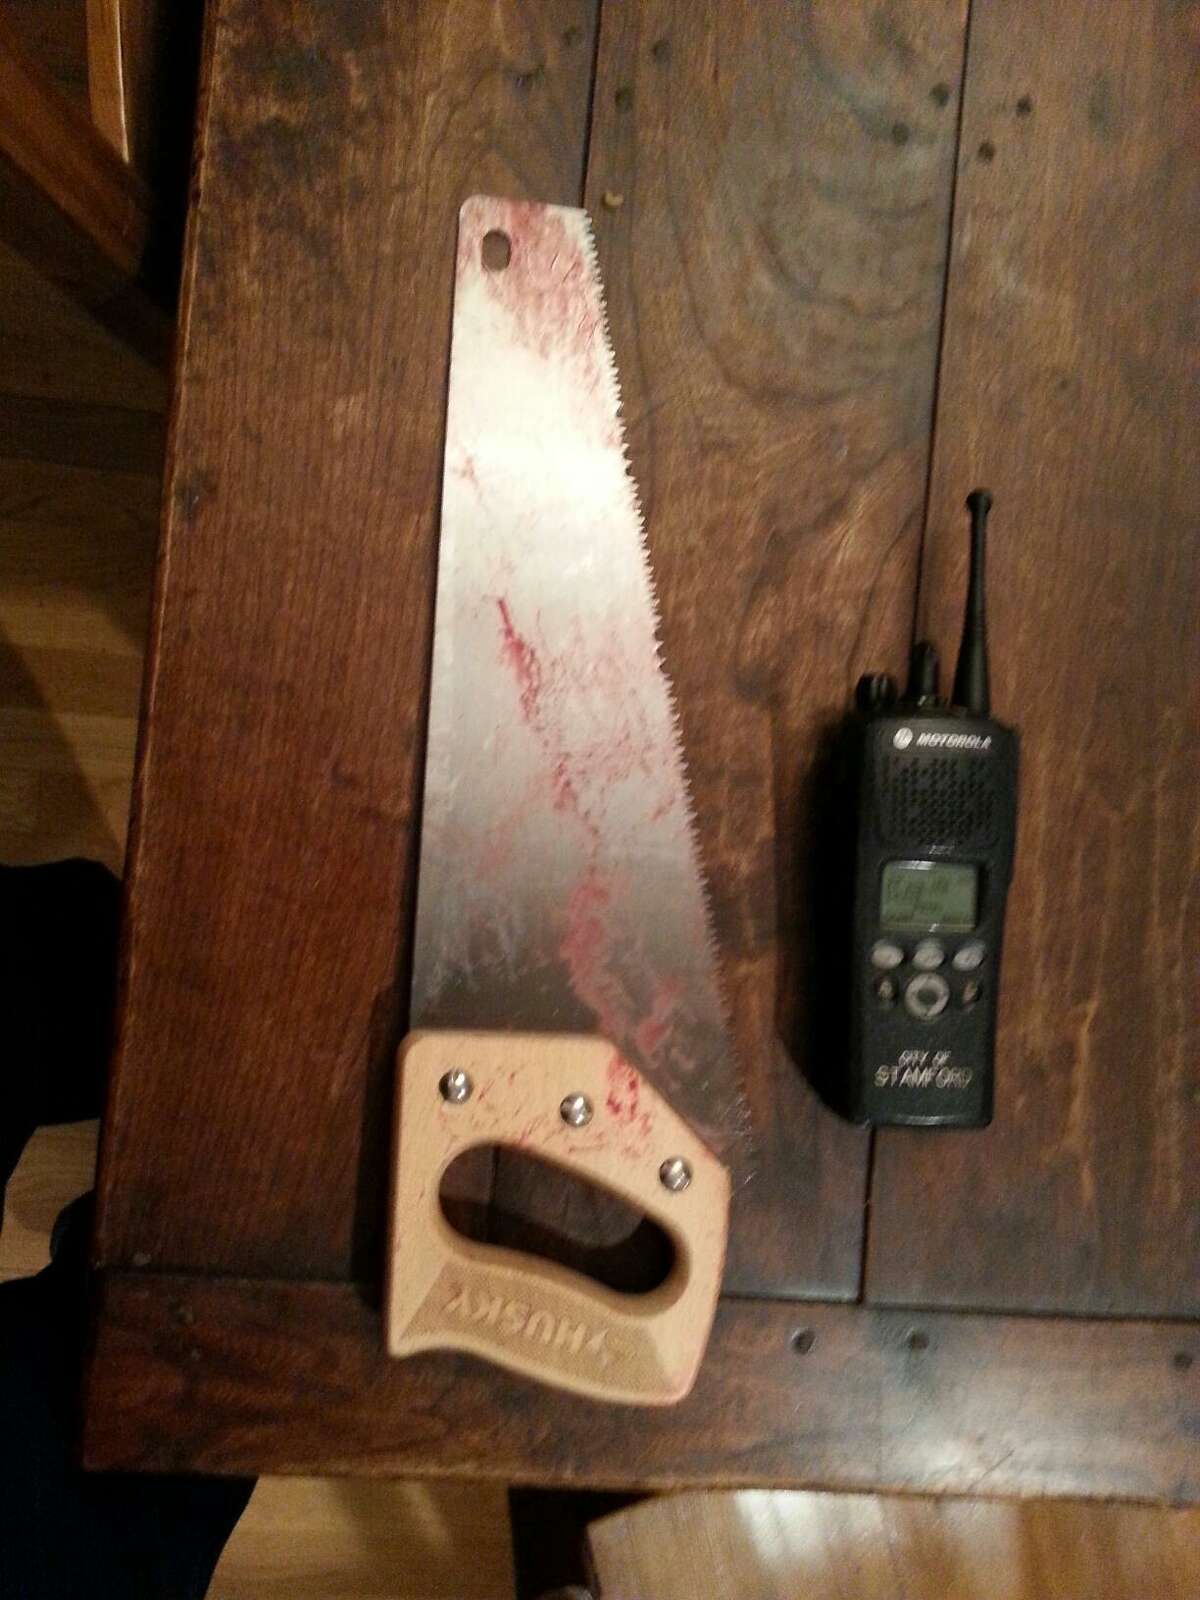 Police say this is the 14-inch handsaw Cesar Olivero allegedly used to nearly hack off the hand of his ex-girlfriend's new boyfriend at her Camp Avenue apartment in Stamford Thursday night.